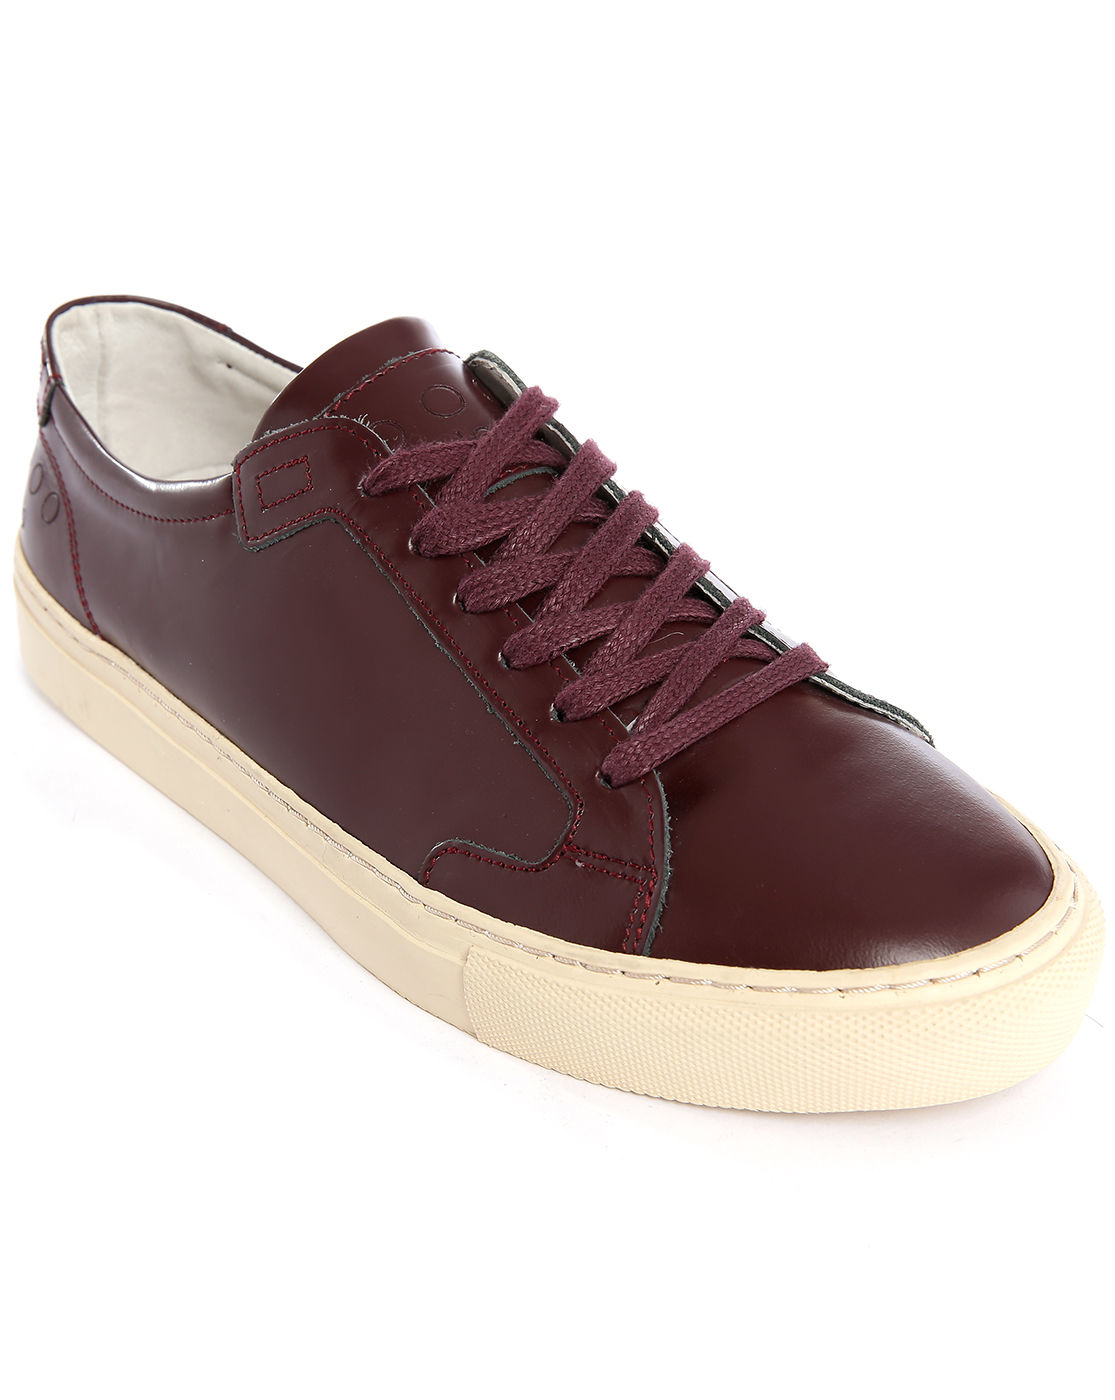 Piola Ica Polido Burgundy Leather Sneakers in Purple for Men | Lyst